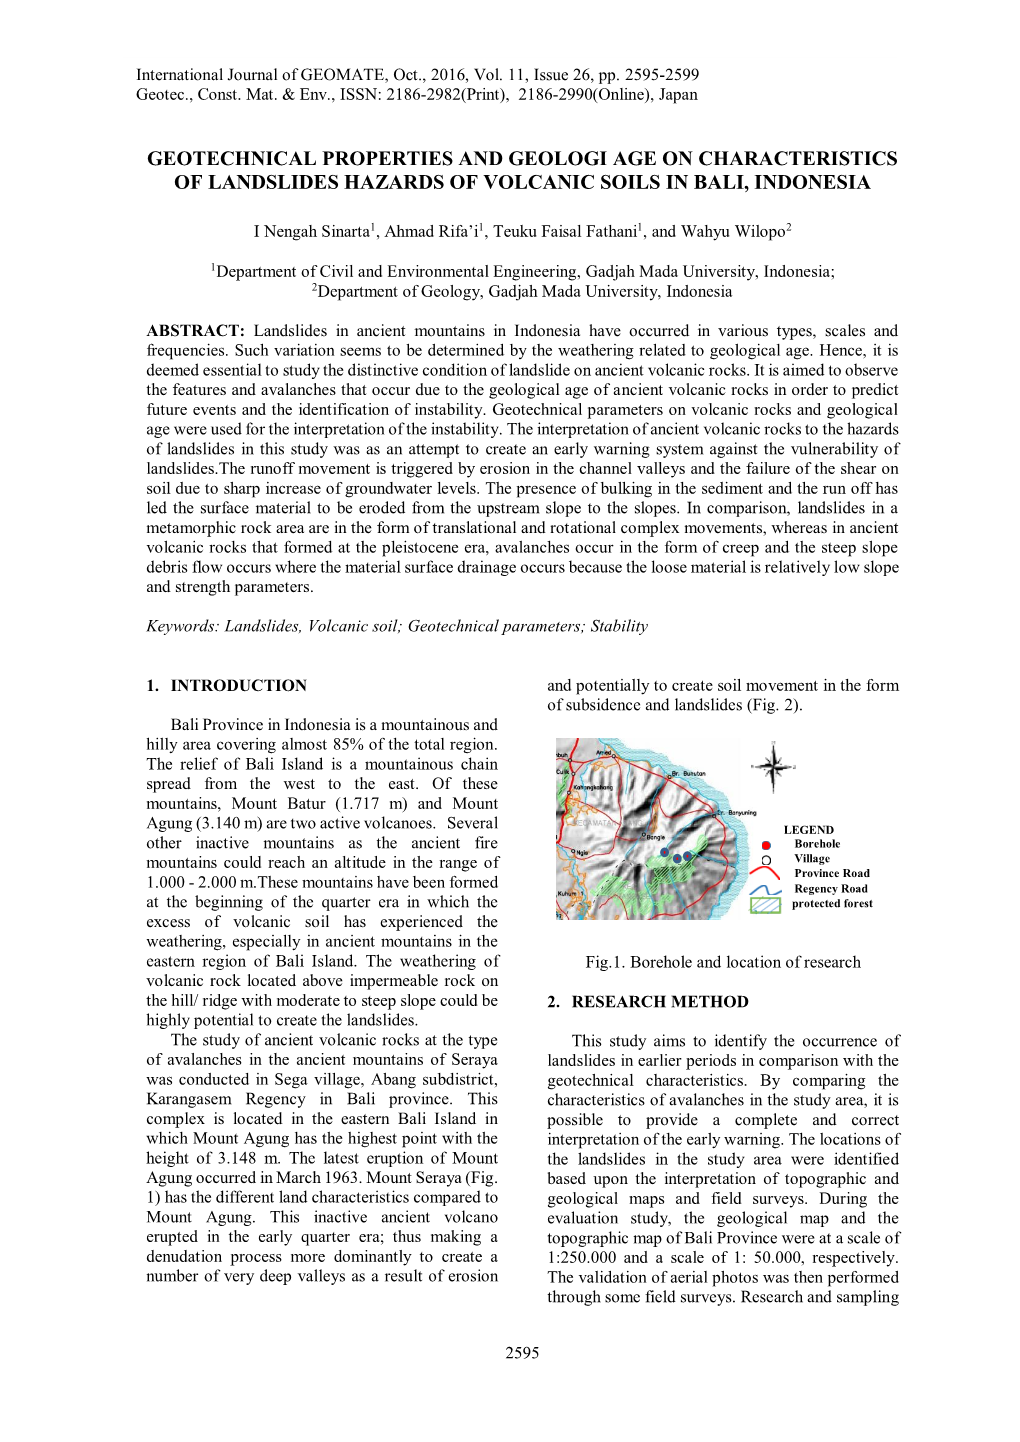 Geotechnical Properties and Geologi Age on Characteristics of Landslides Hazards of Volcanic Soils in Bali, Indonesia